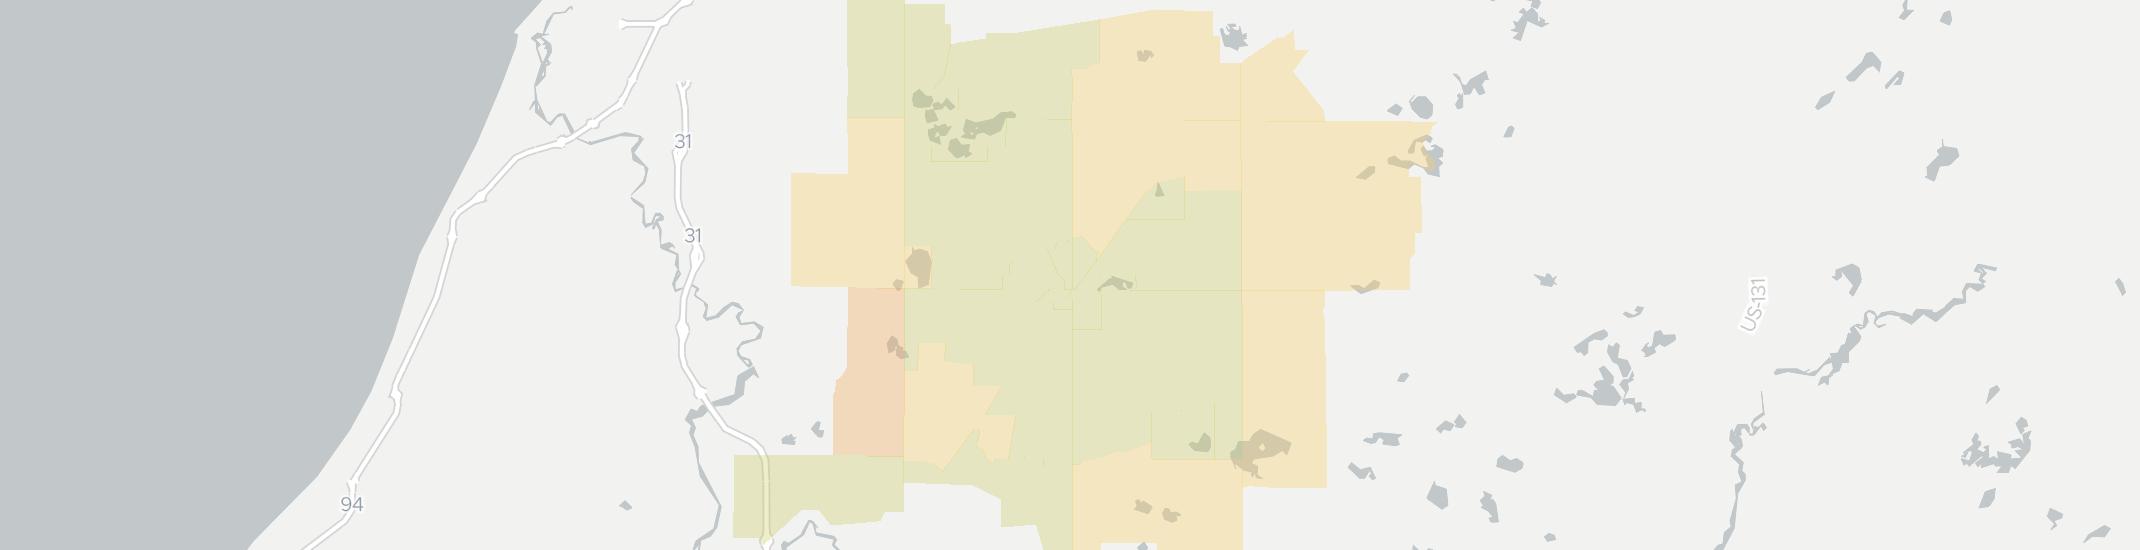 Dowagiac Internet Competition Map. Click for interactive map